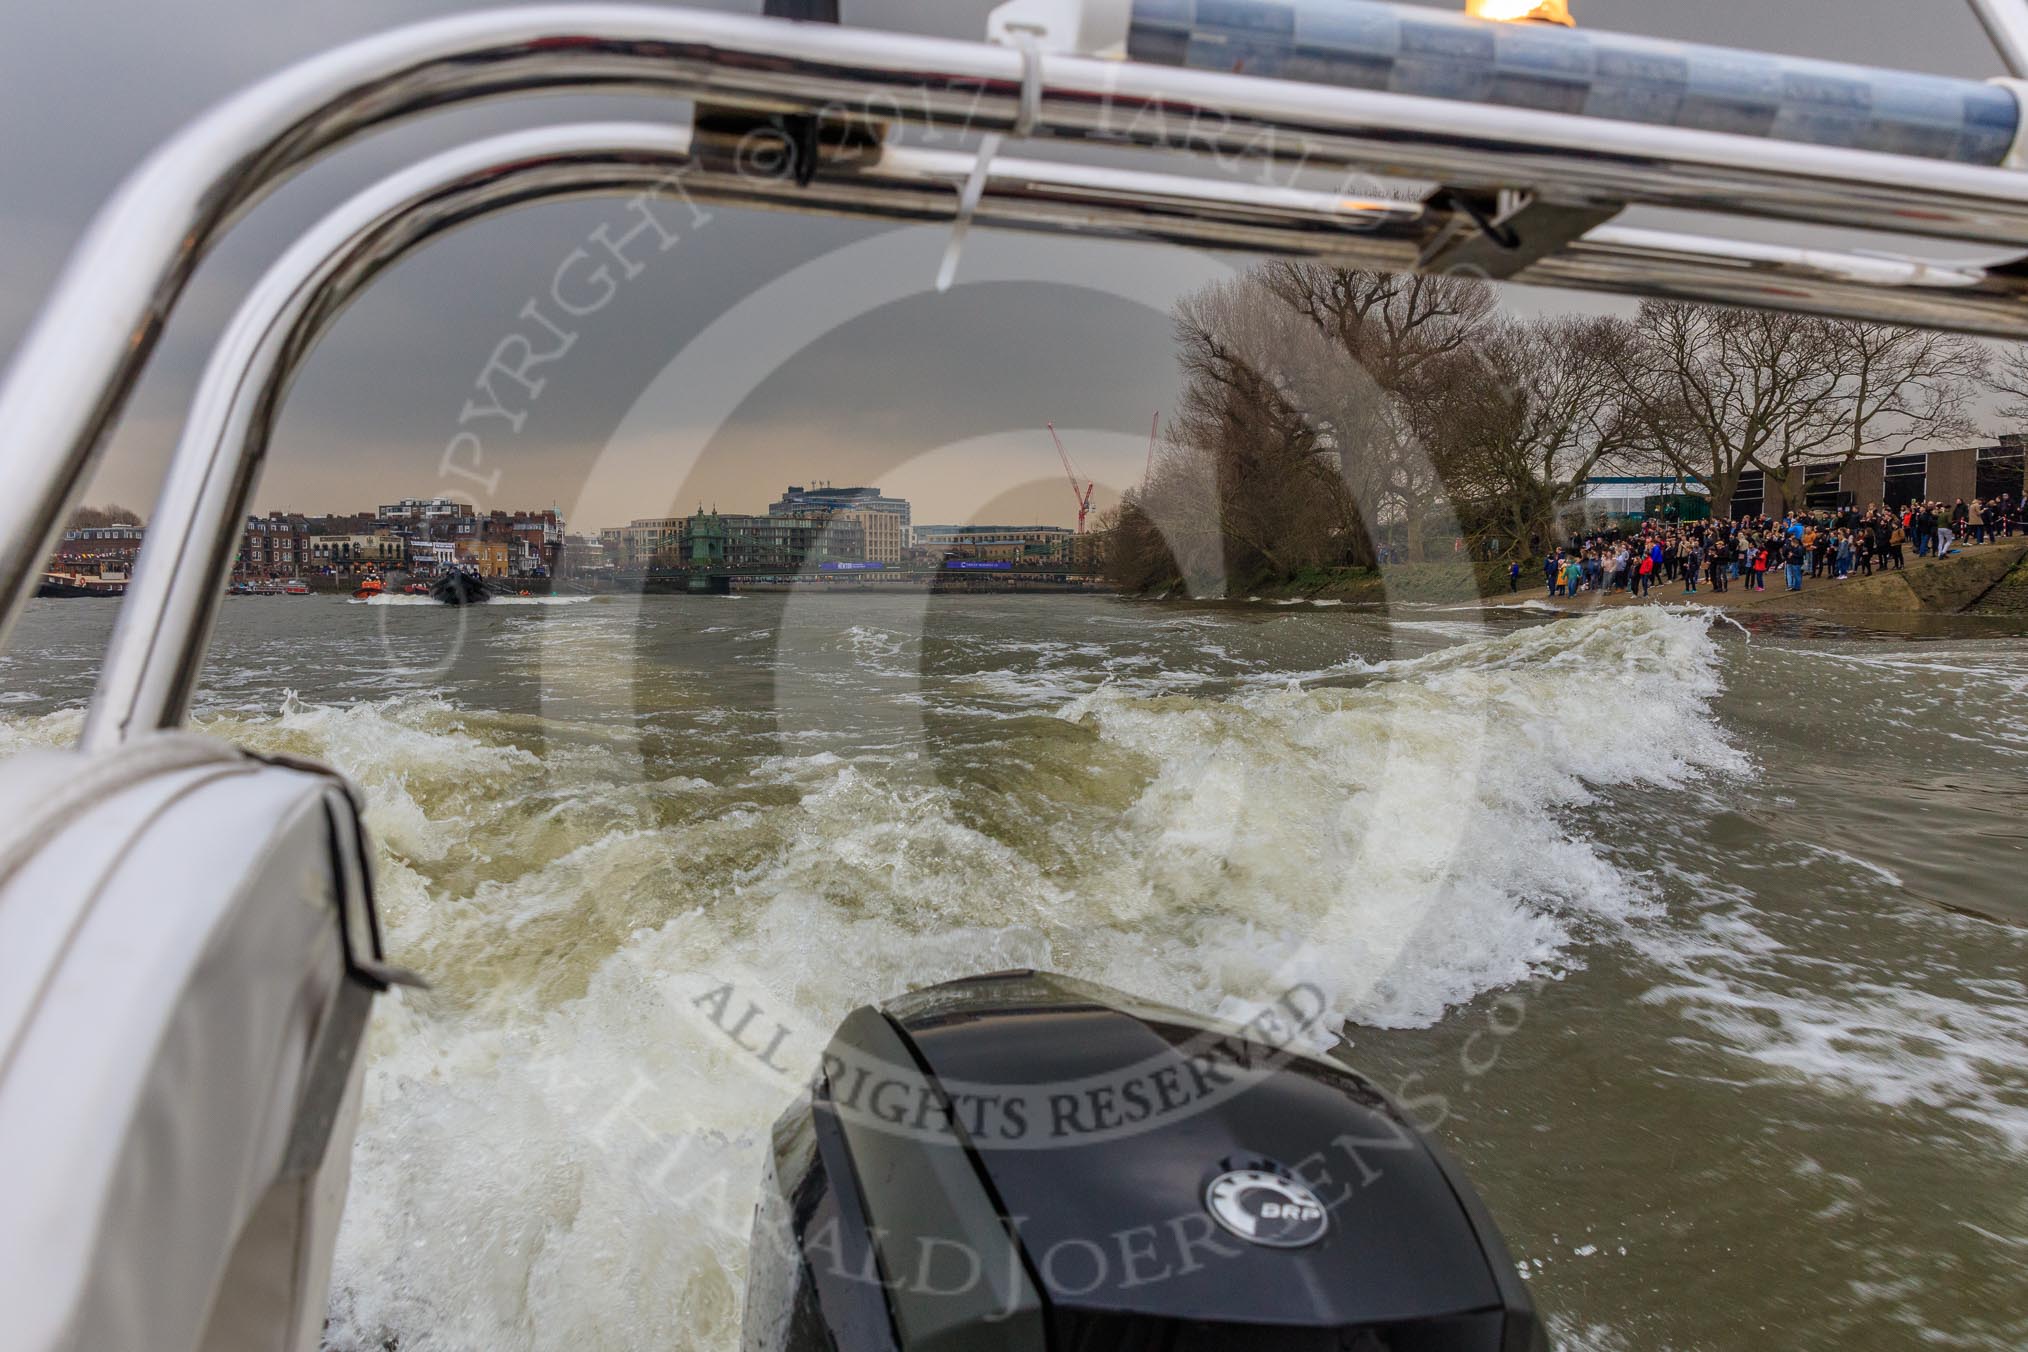 The Cancer Research UK Women's Boat Race 2018: The waves behind the press launch give an idea how fast the rowers are - they are fast!.
River Thames between Putney Bridge and Mortlake,
London SW15,

United Kingdom,
on 24 March 2018 at 16:40, image #185